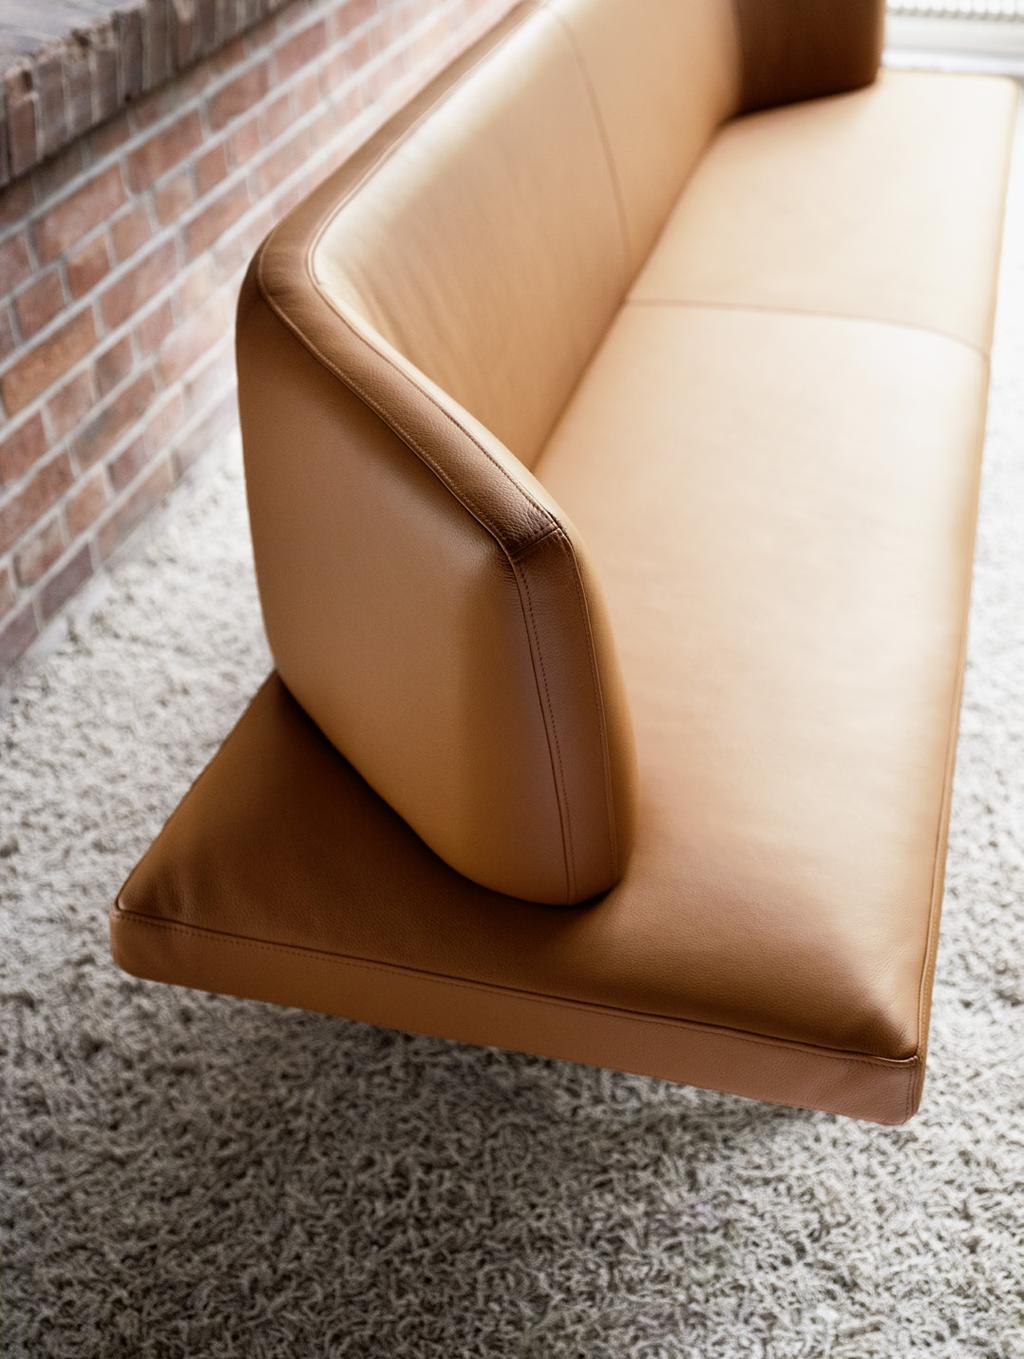 The flat seat upholstery with the backrest placed on top makes Insit